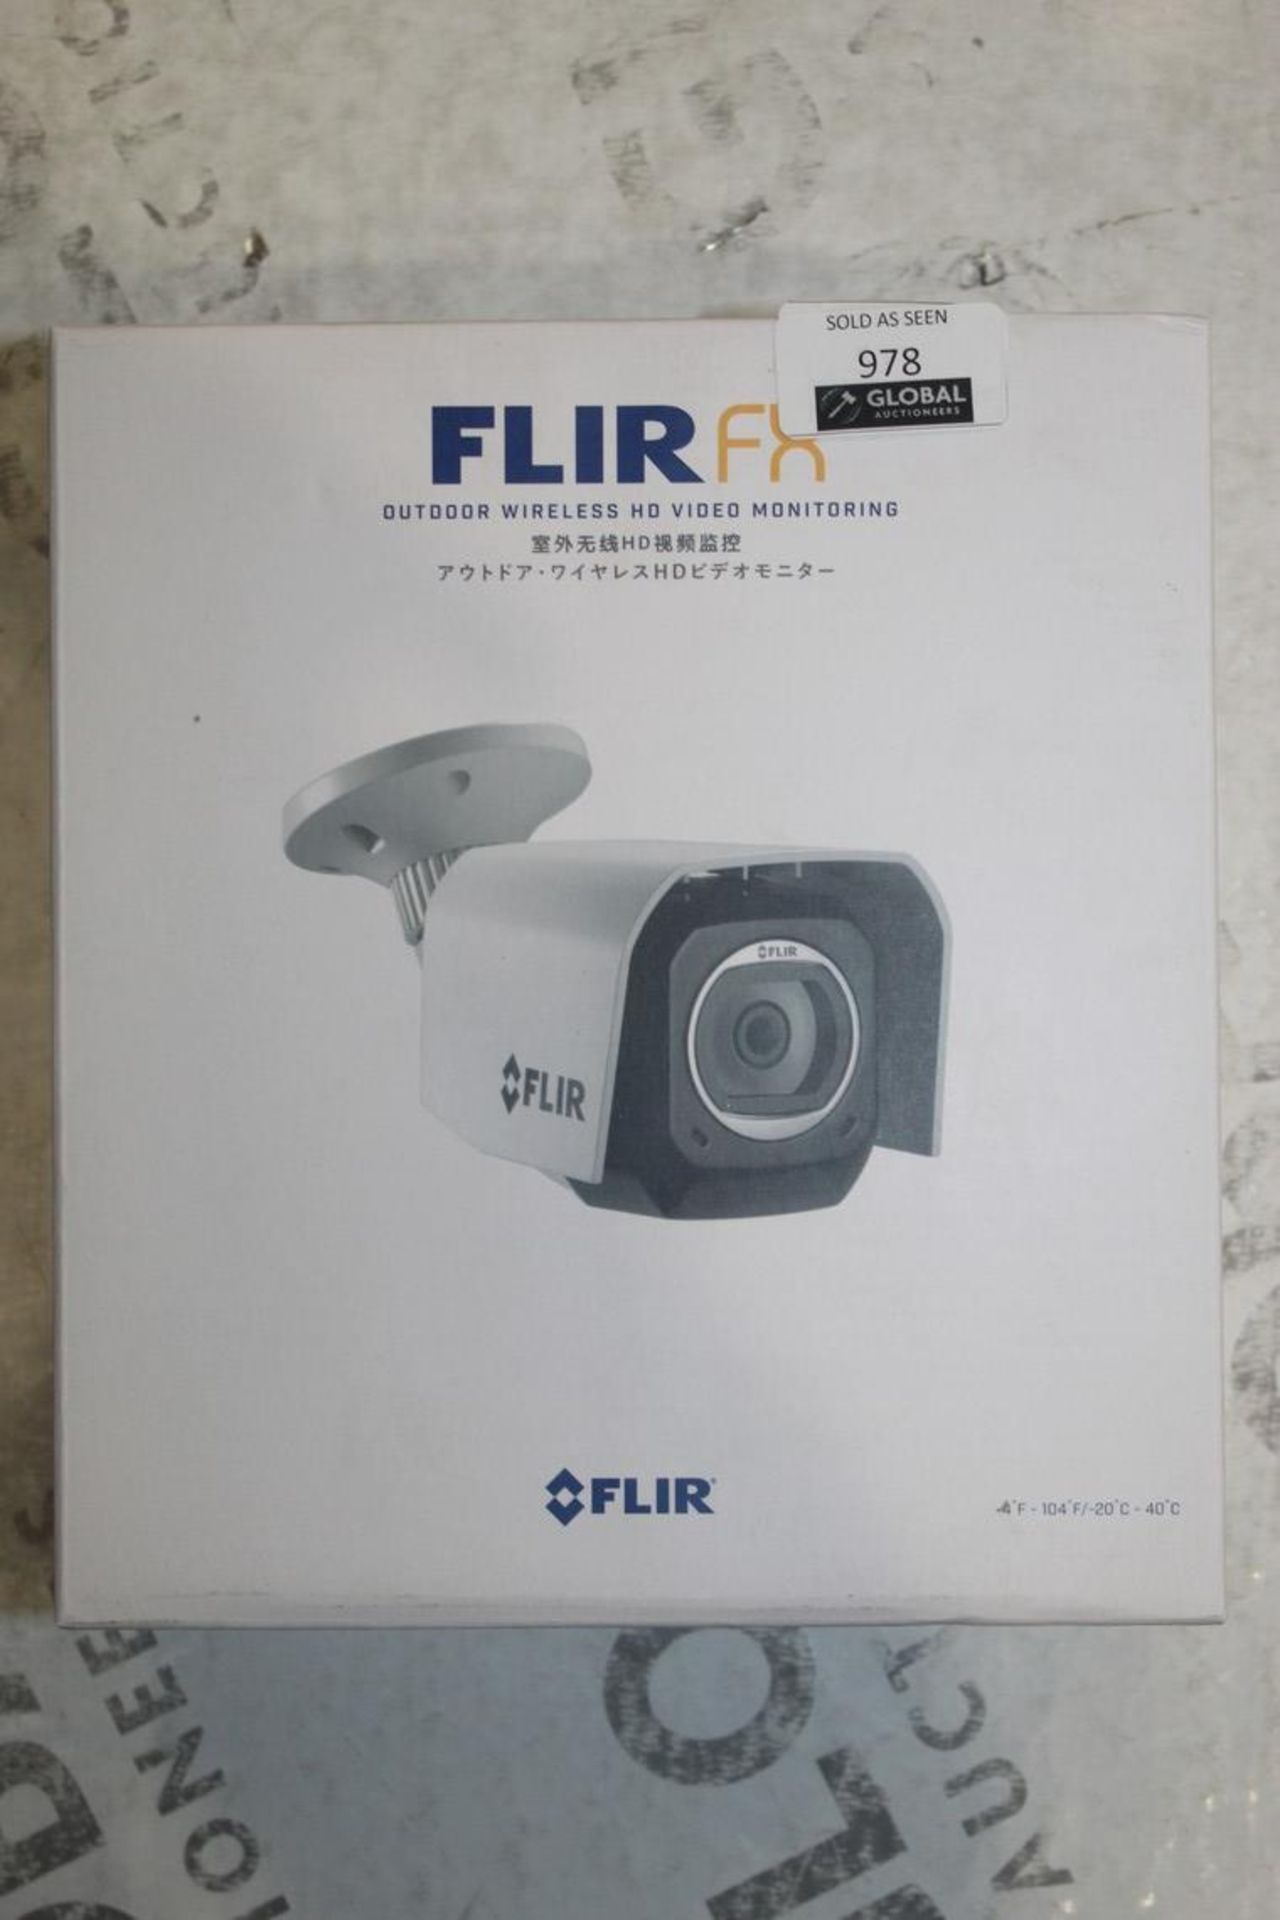 Boxed Flir FX Outdoor Wireless HD Video Monitoring CCTV Security Camera RRP £300 (Pictures Are For